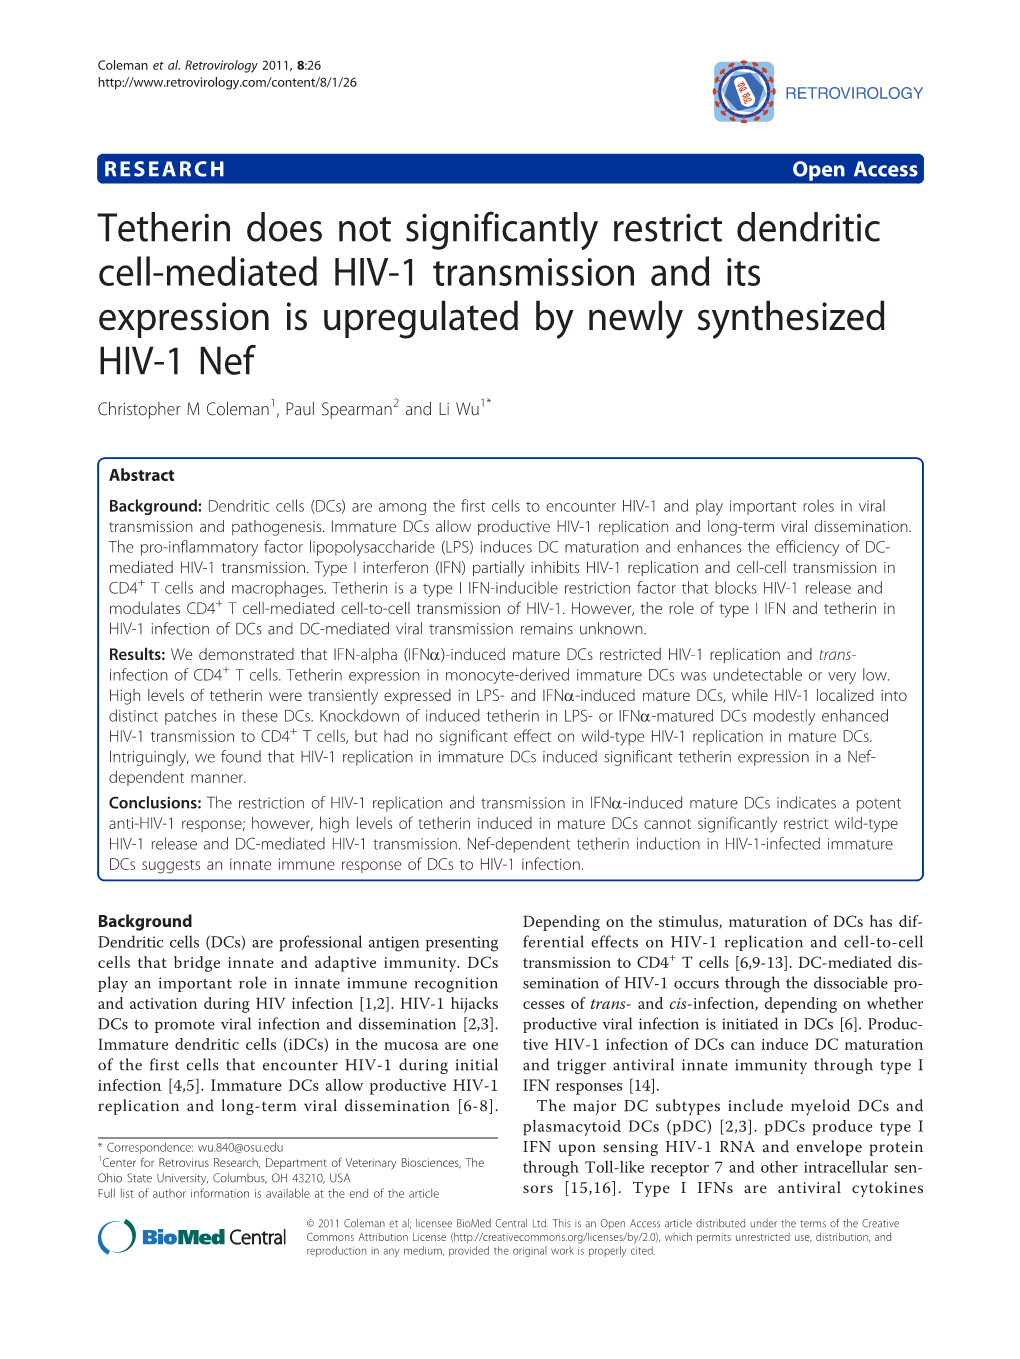 Tetherin Does Not Significantly Restrict Dendritic Cell-Mediated HIV-1